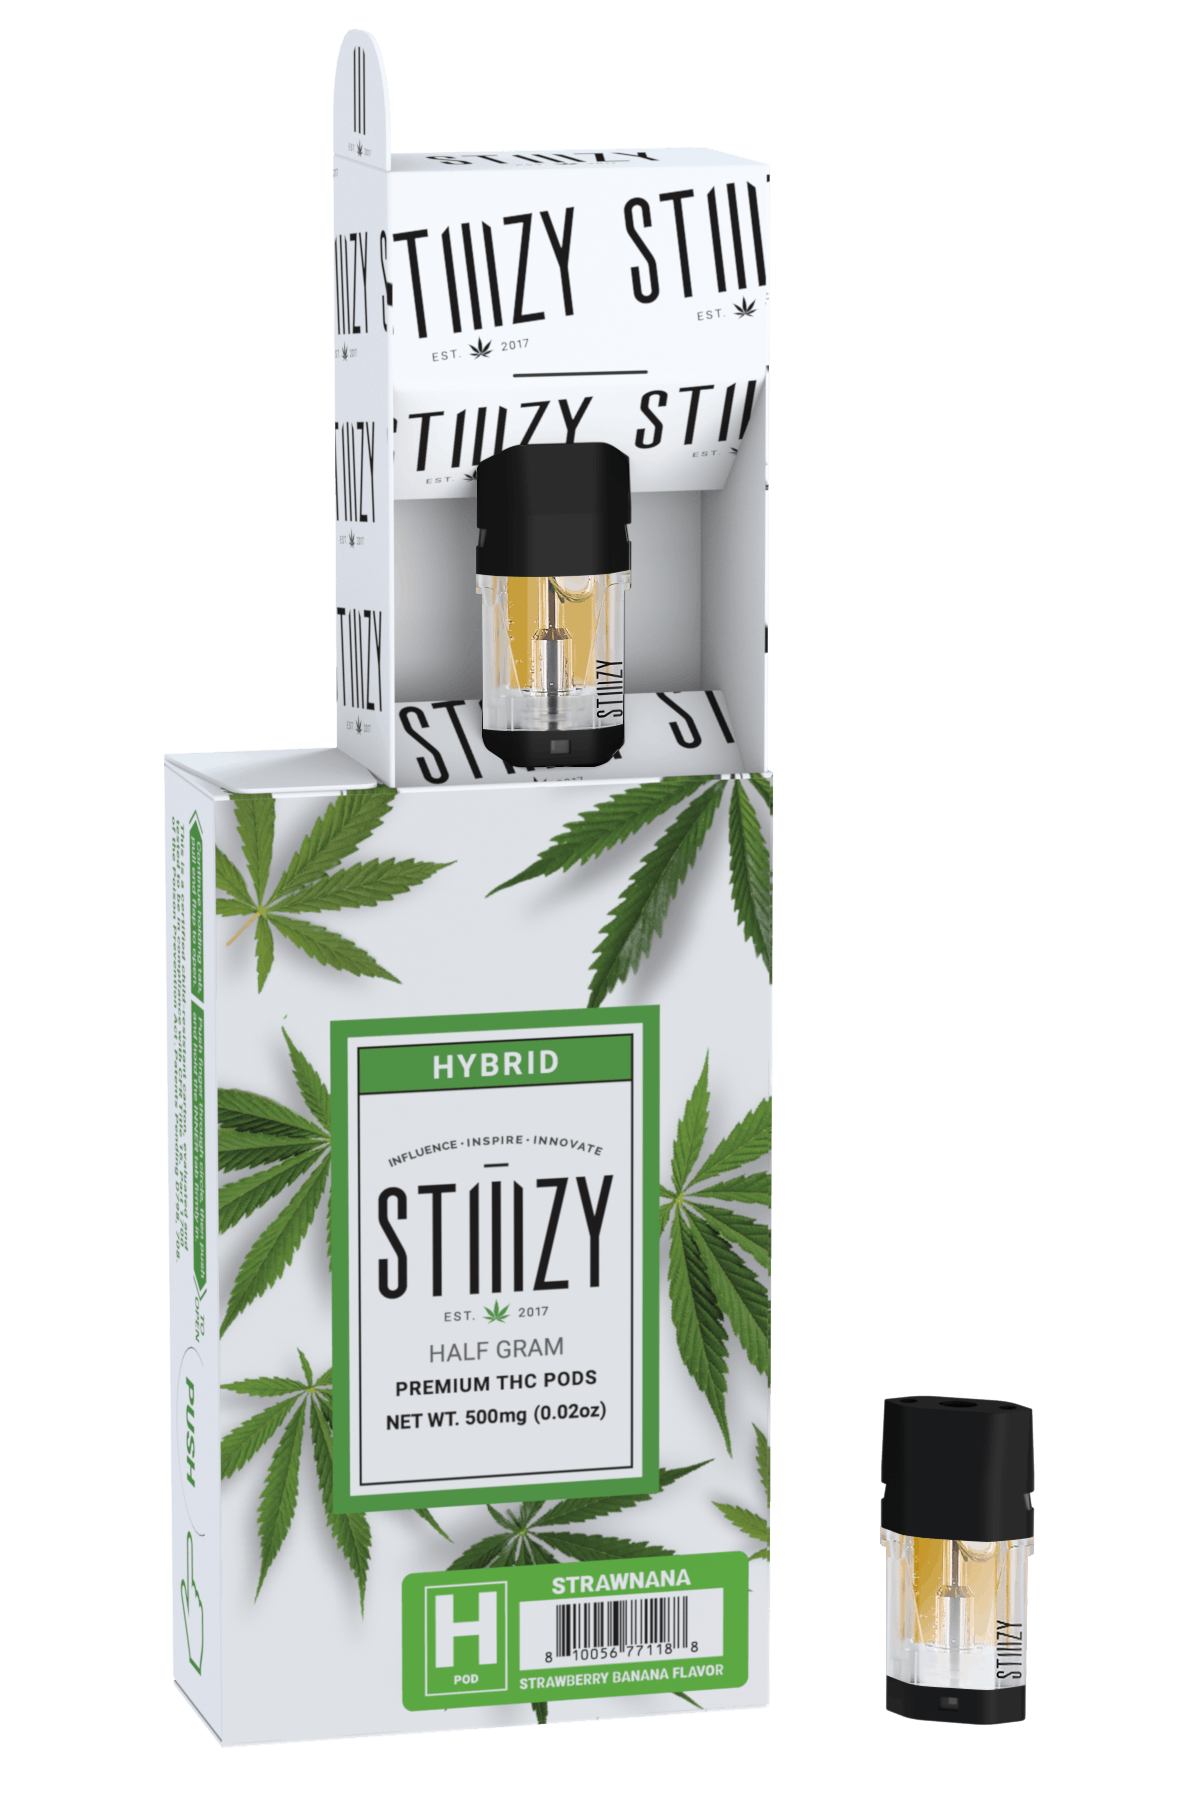 STIIIZY Reduces Size of Cannabis Carton | Packaging World